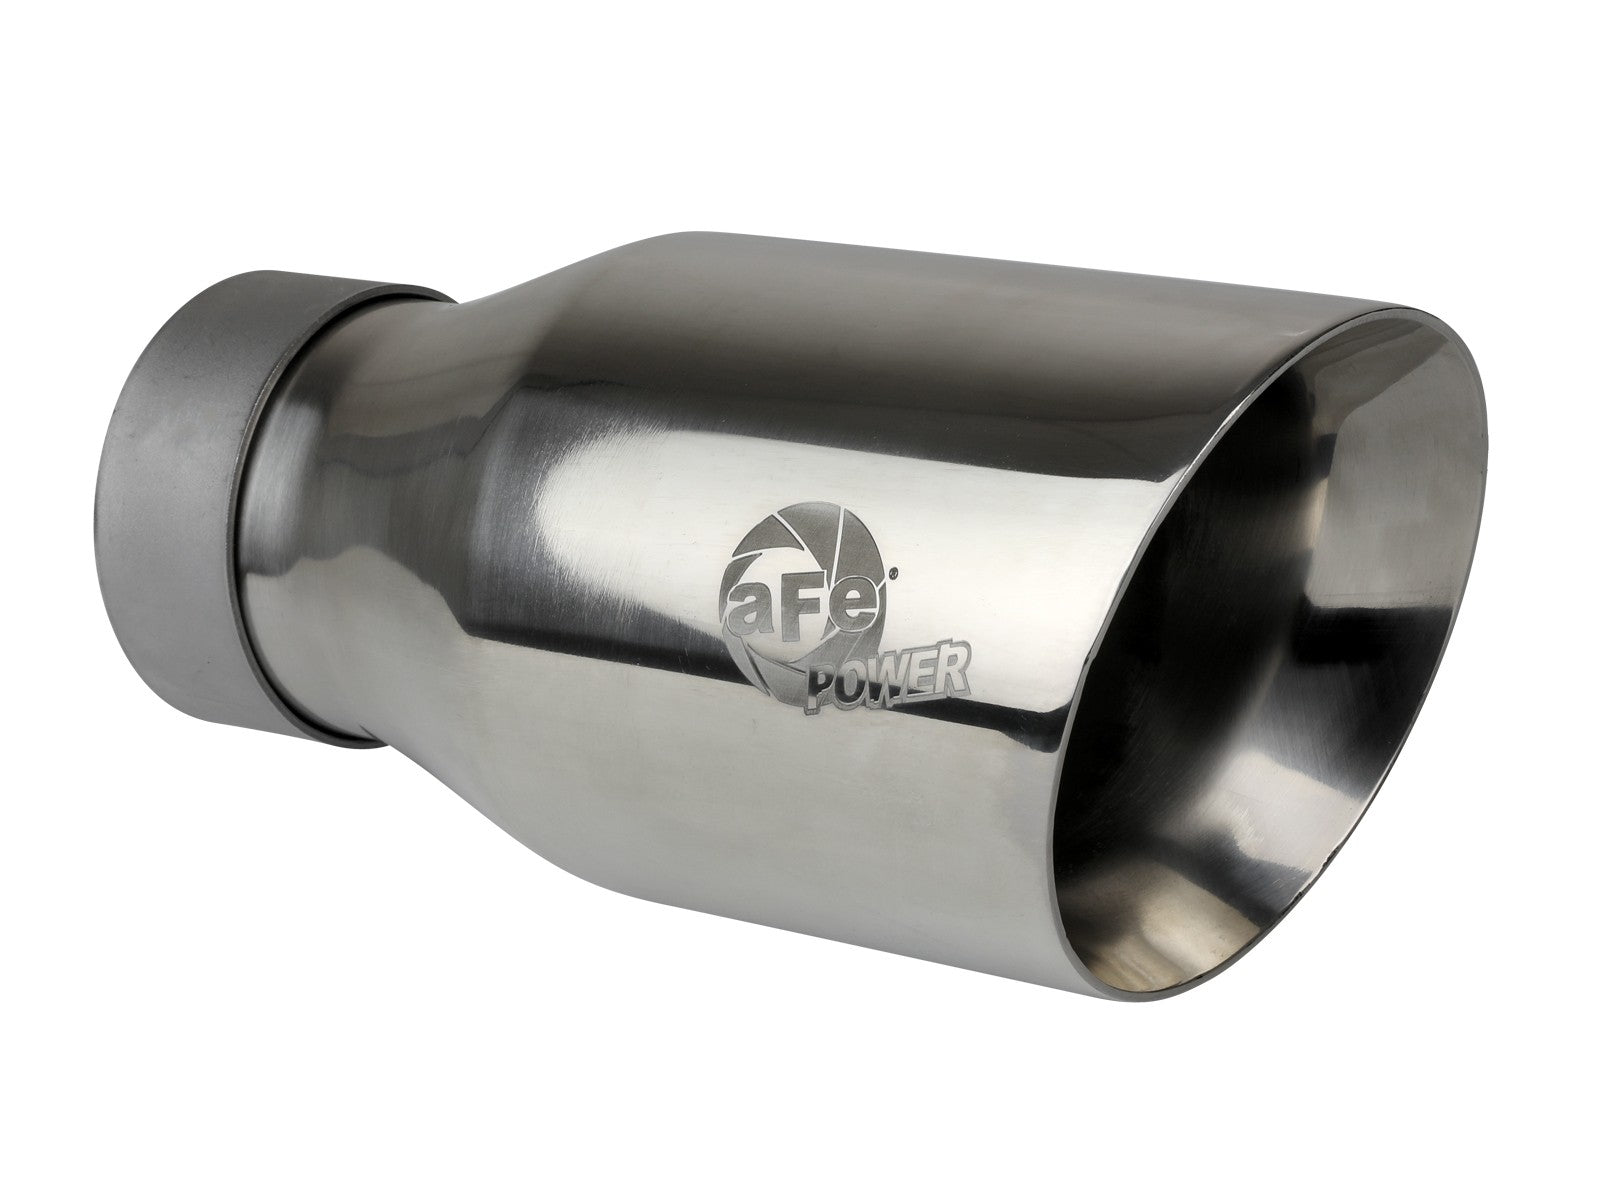 MACH Force-Xp 304 Stainless Steel Clamp-on Exhaust Tip Polished 3 IN Inlet x 4-1/2 IN Outlet x 9 IN L